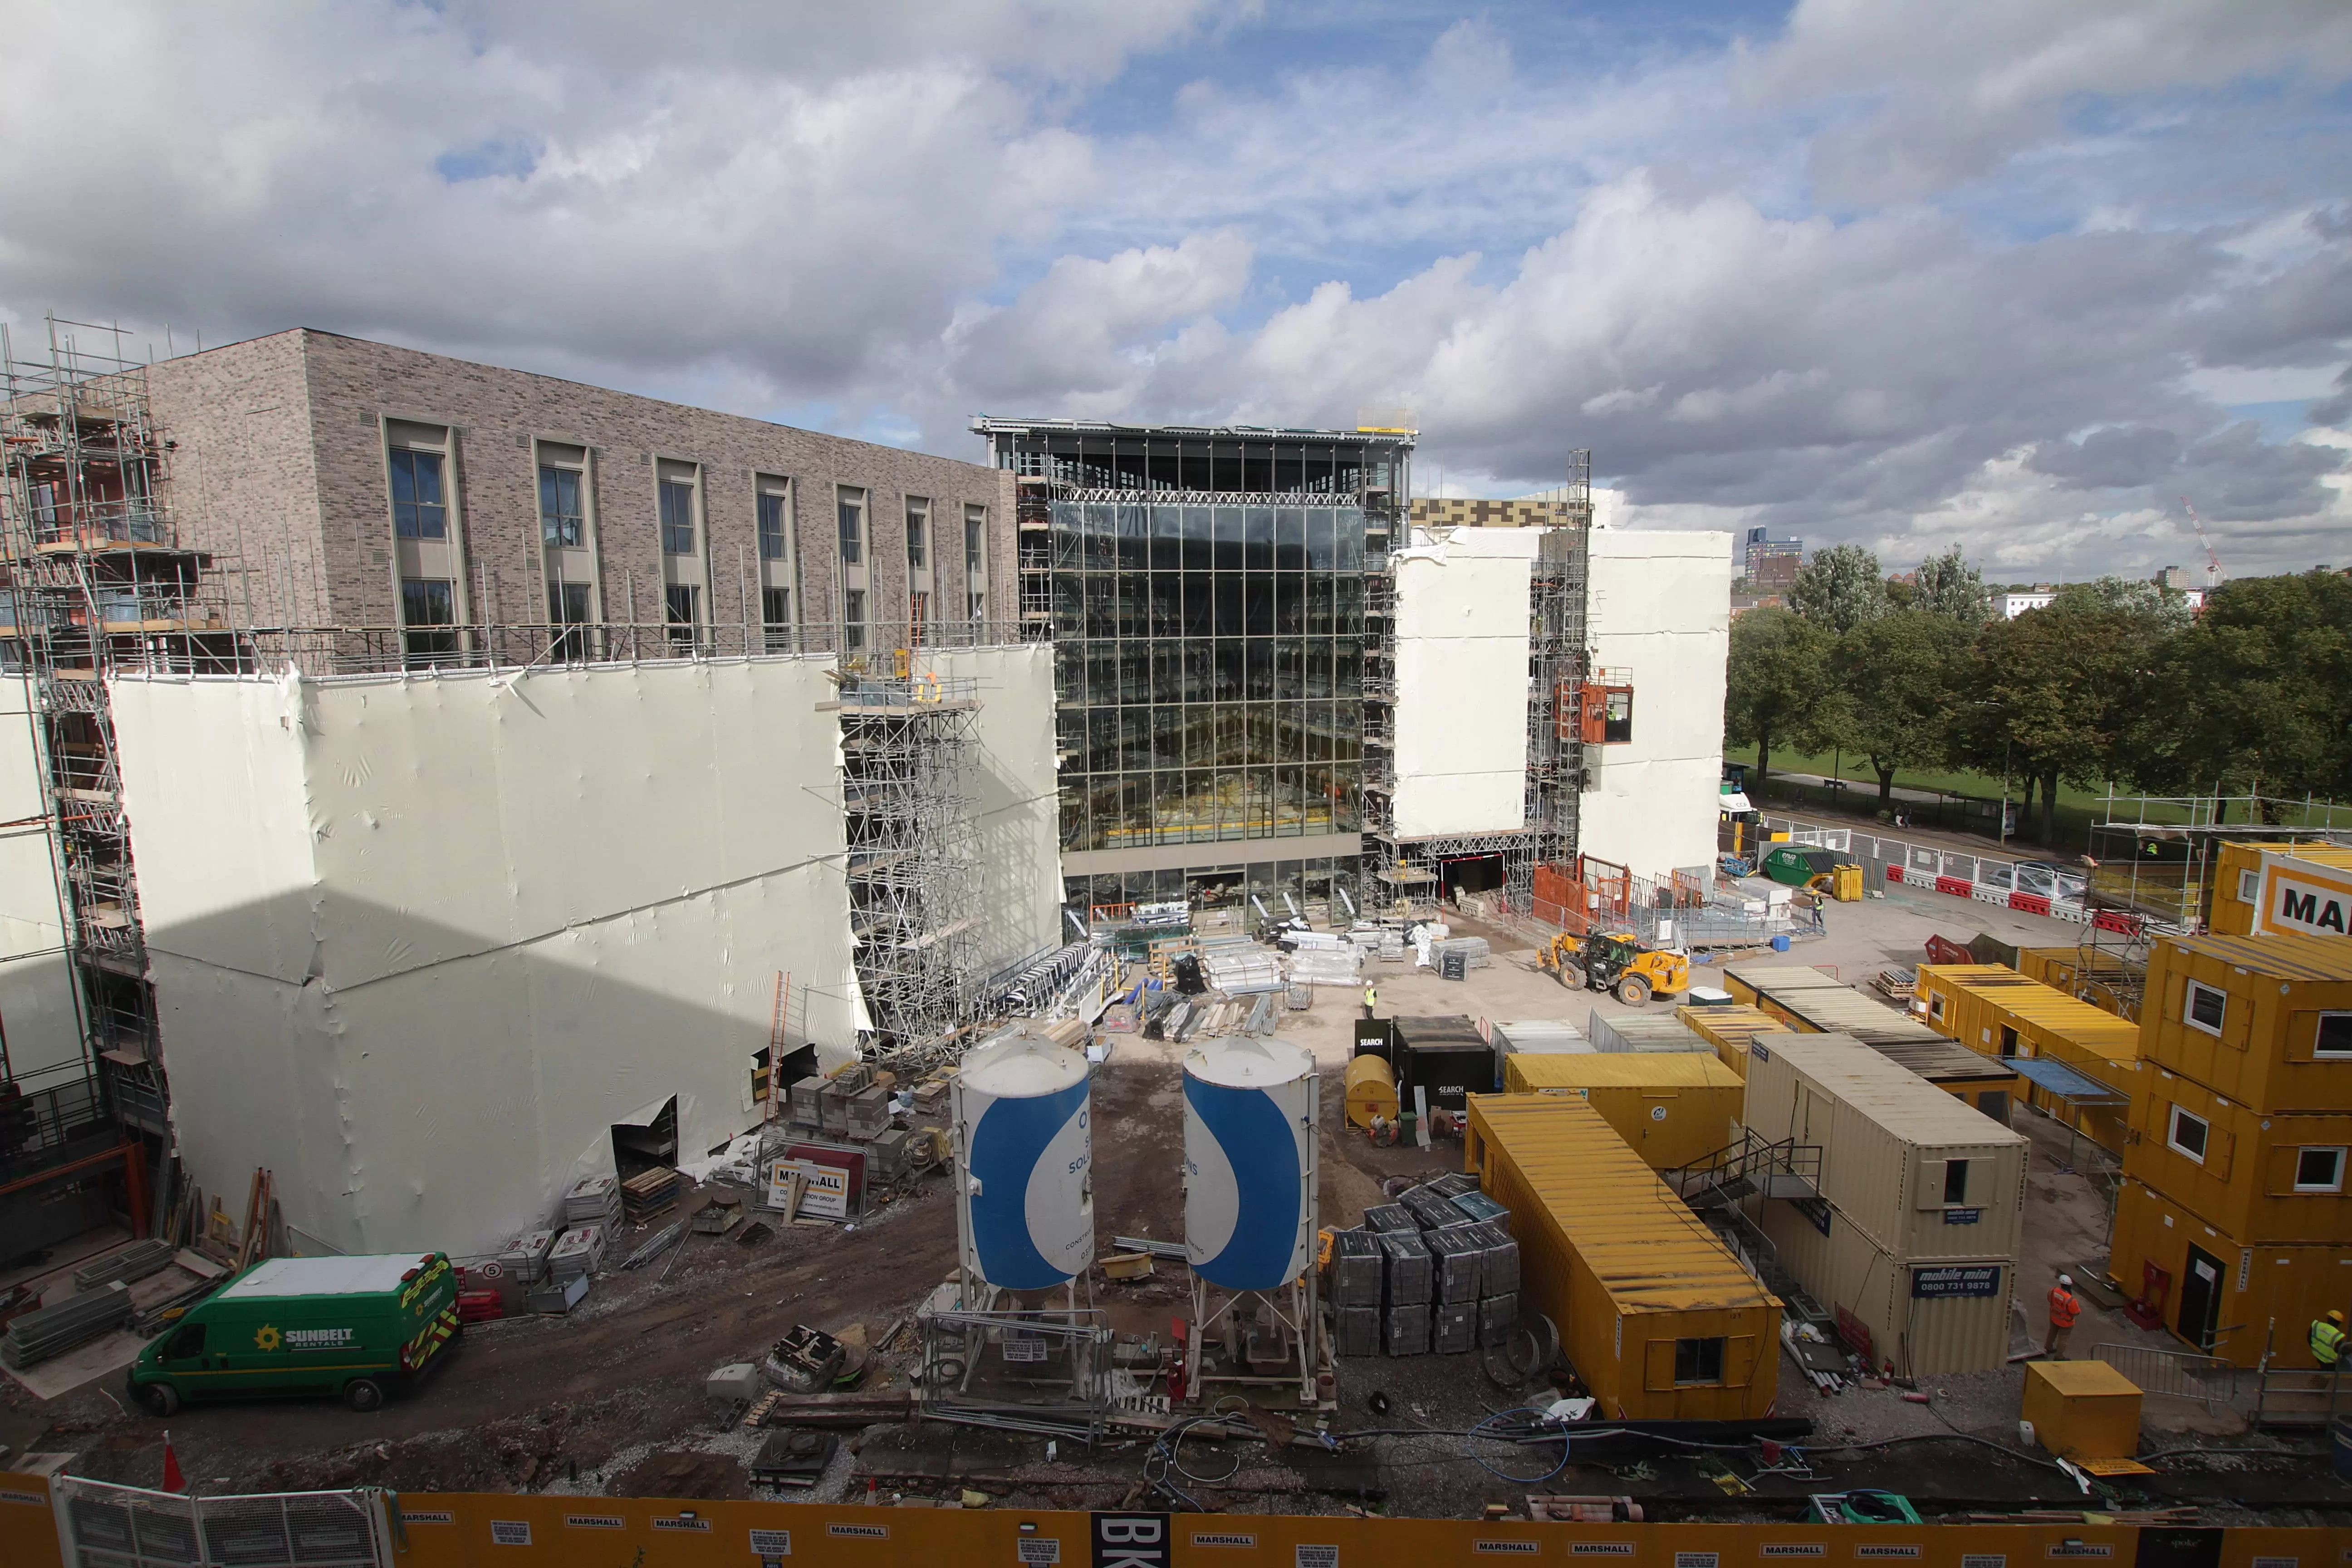 Time-lapse across the East Midlands - capturing redevelopment at Leicester Tigers